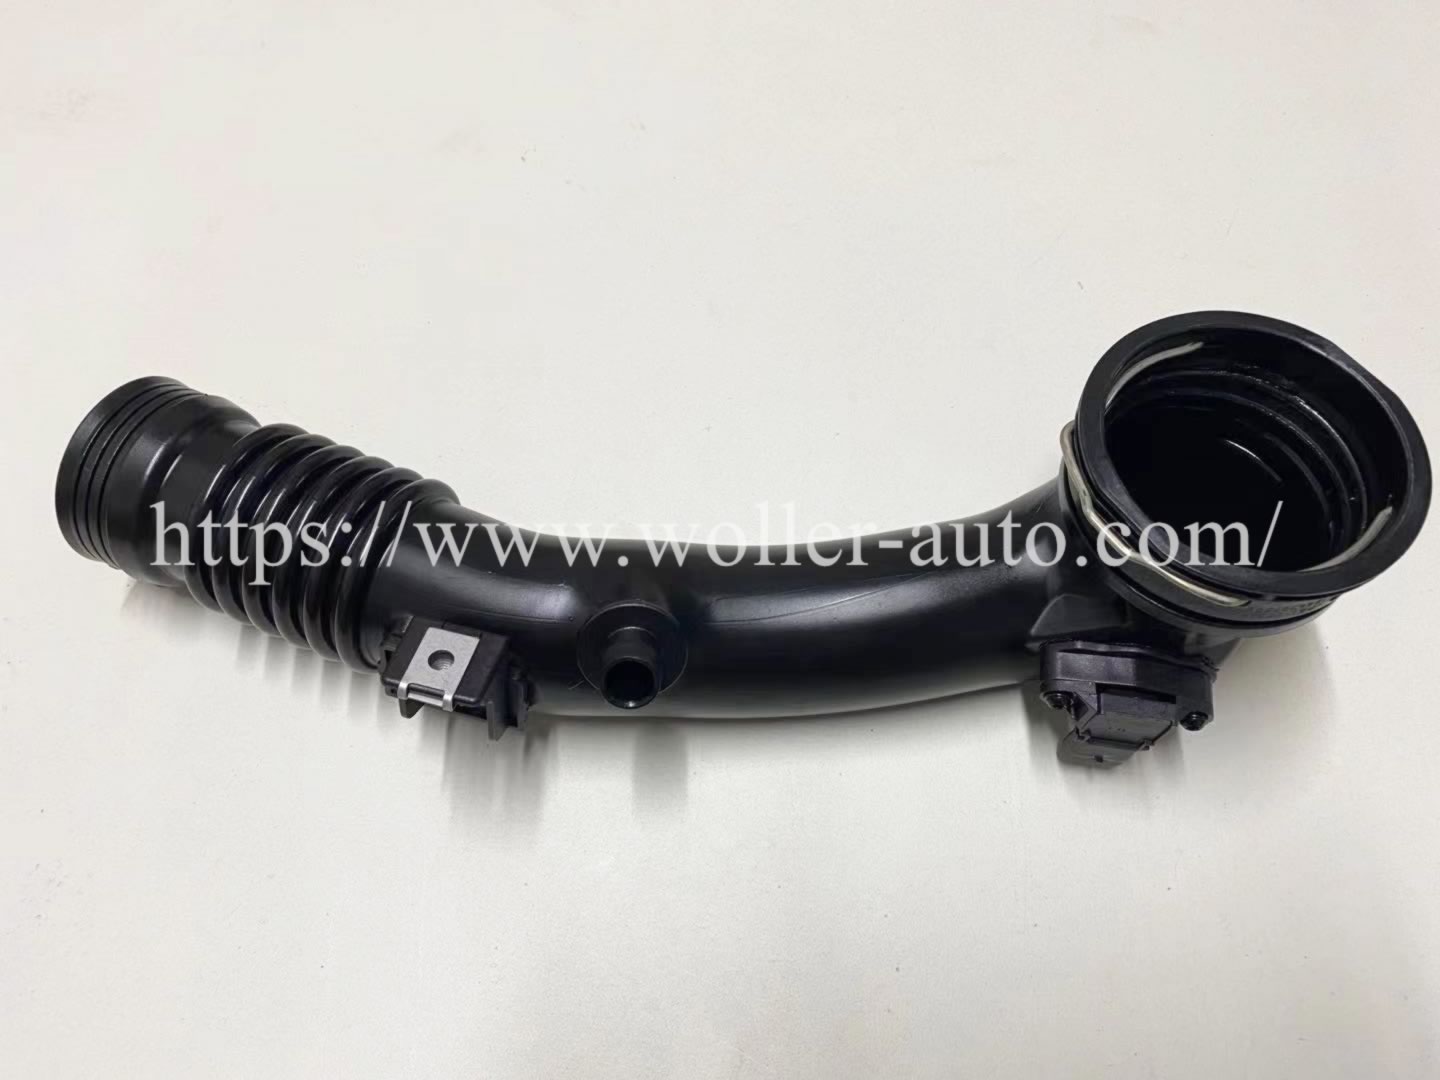 Turbo Charge Air Induction Pipe OE 13717588268 13717609811 For BMW X5 X6 F01 F02 F07 F10 F18 E70 E71 E72